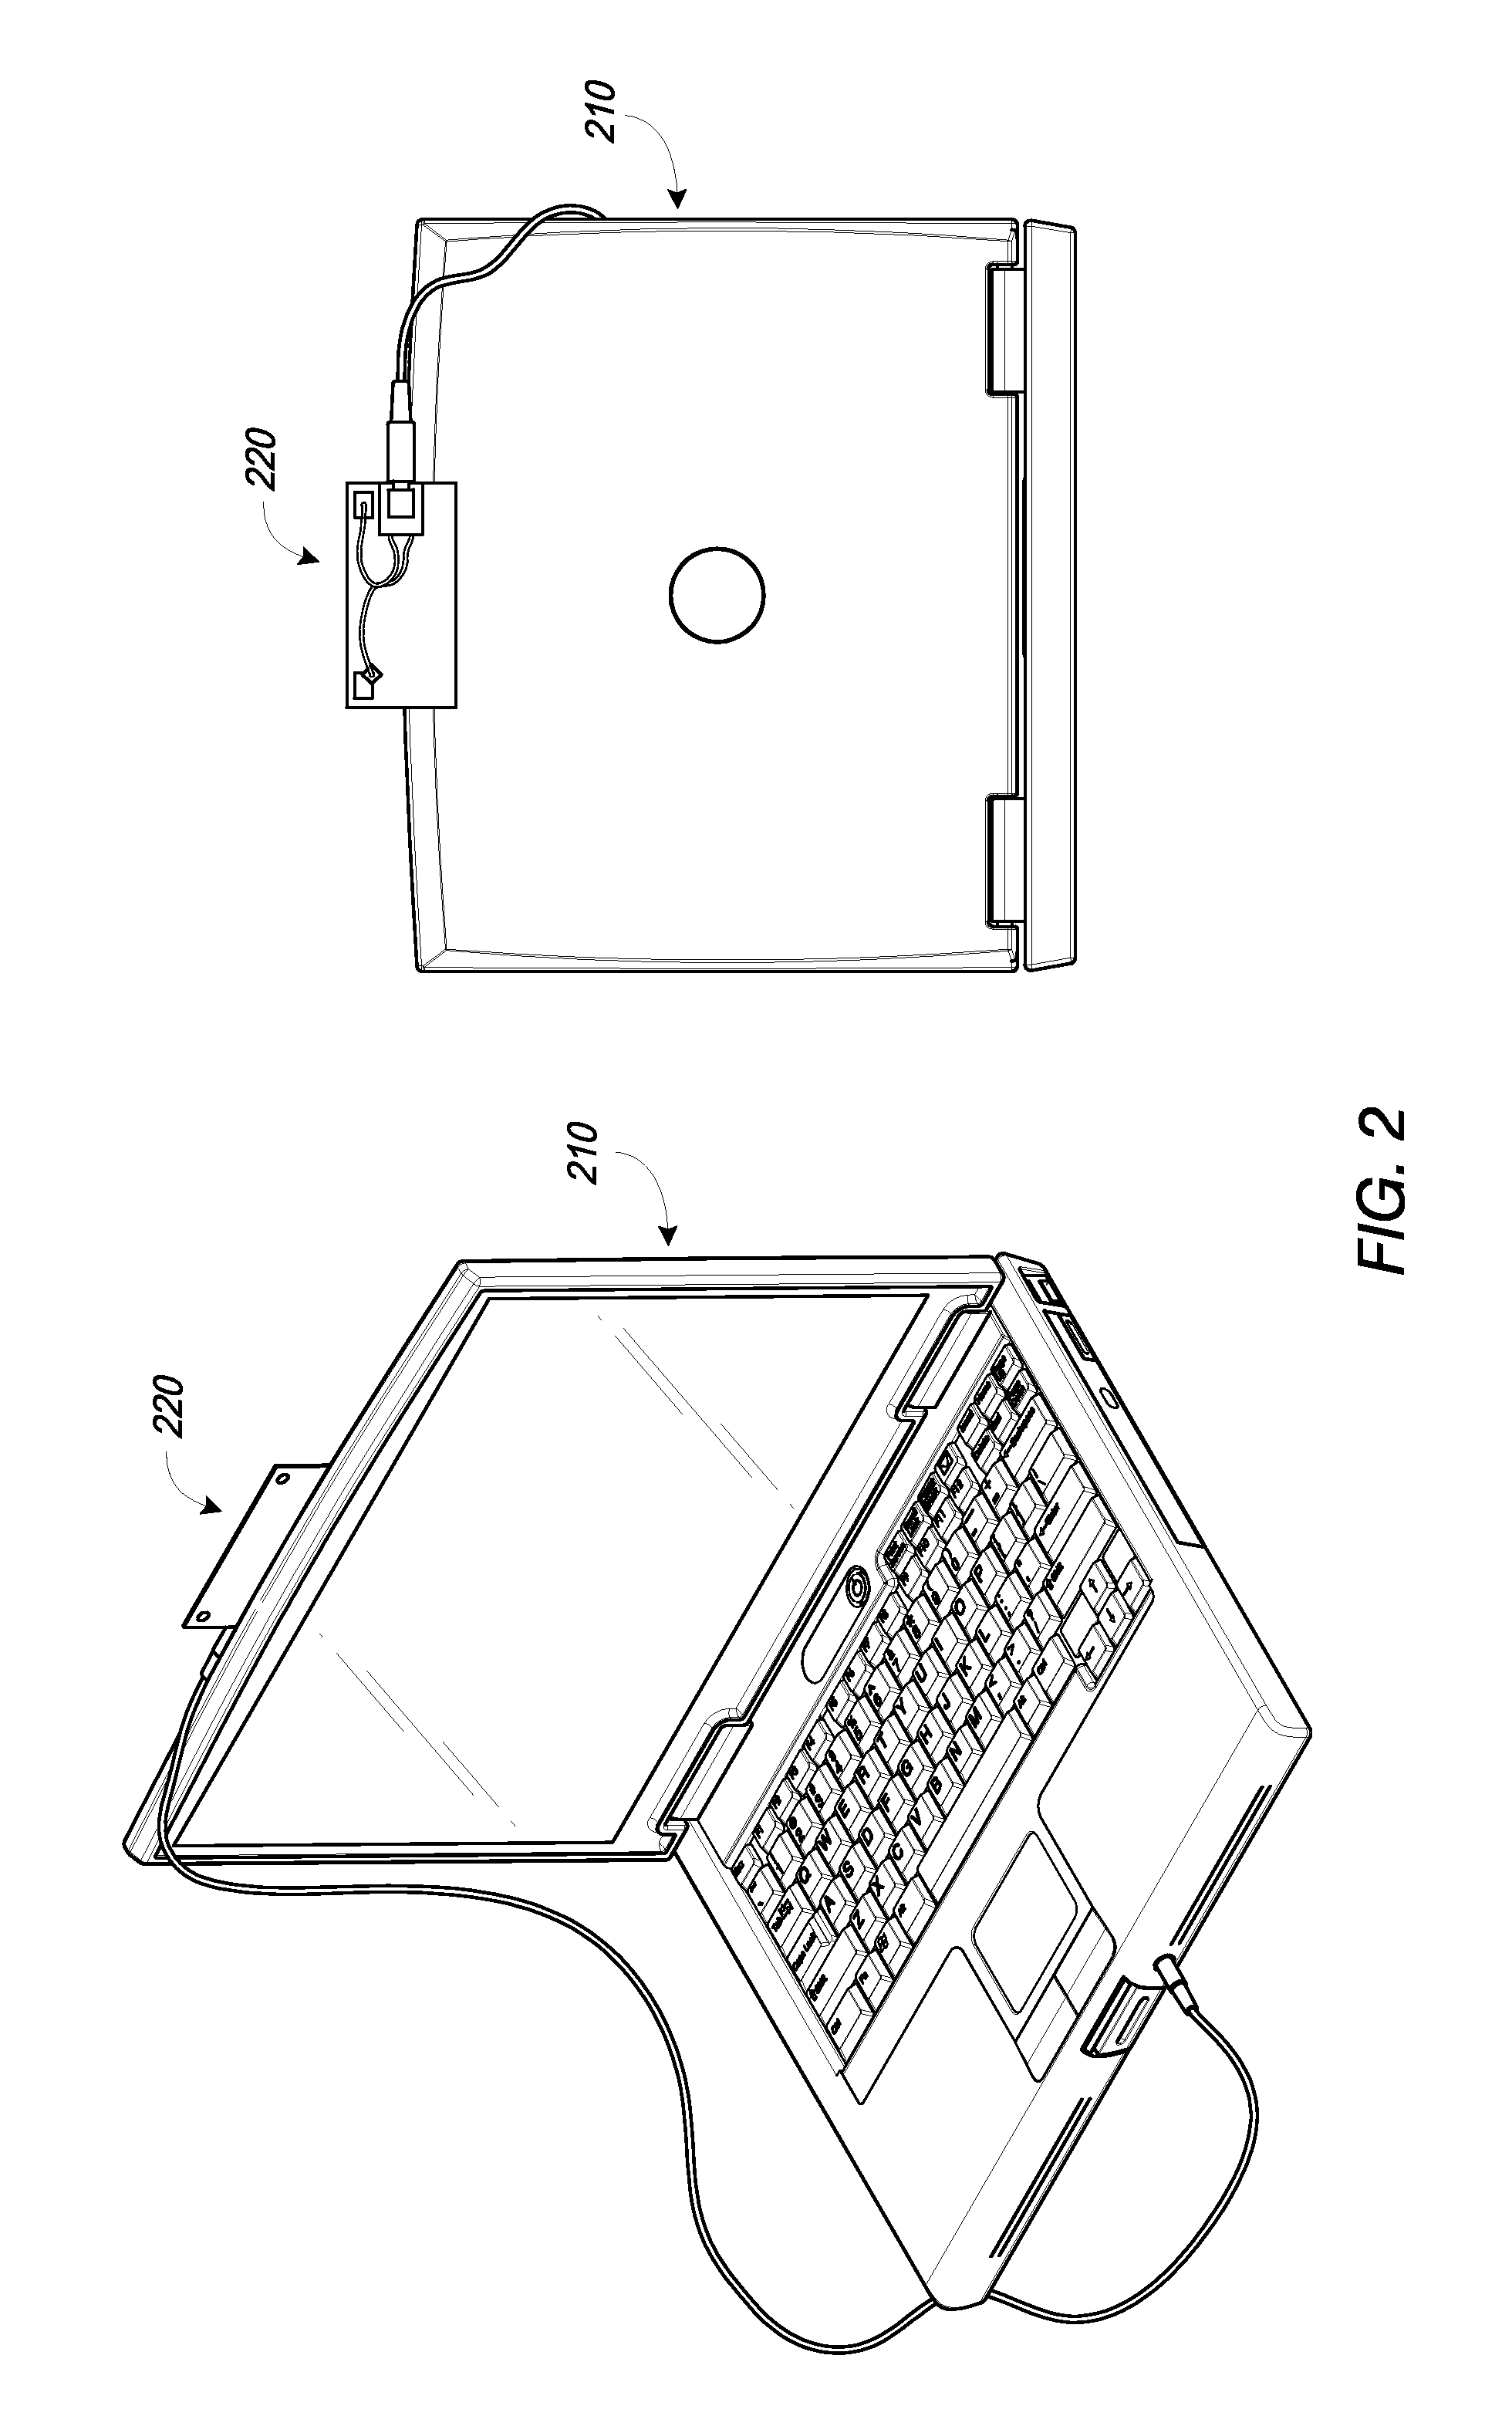 Microphone array processing system